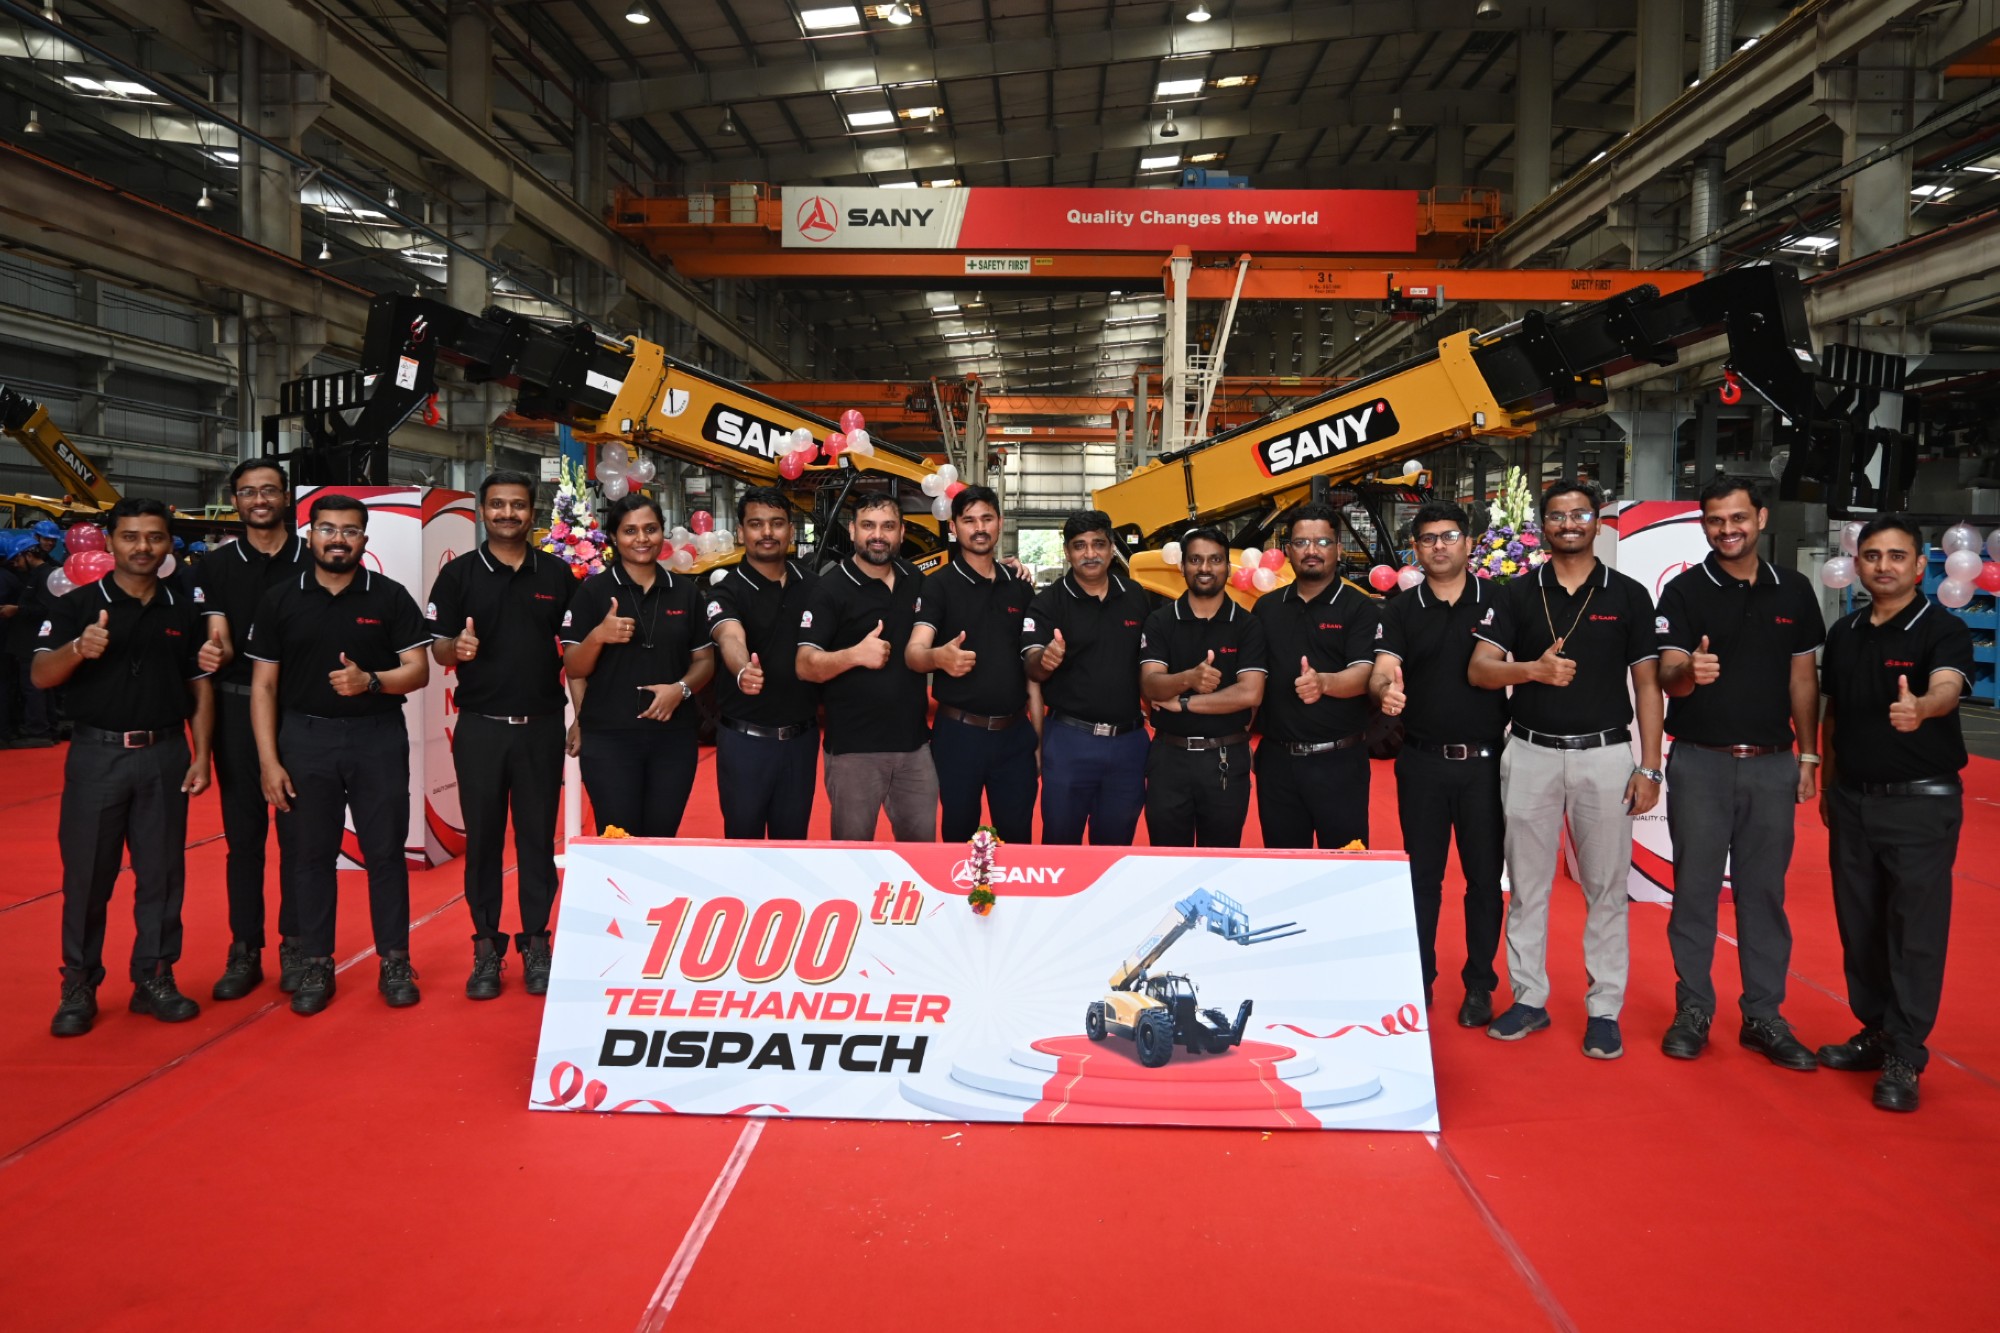 SANY India, a leading construction equipment manufacturer, is celebrating a significant milestone in its international expansion by successfully delivering over 1,000 Telehandlers to the United States.